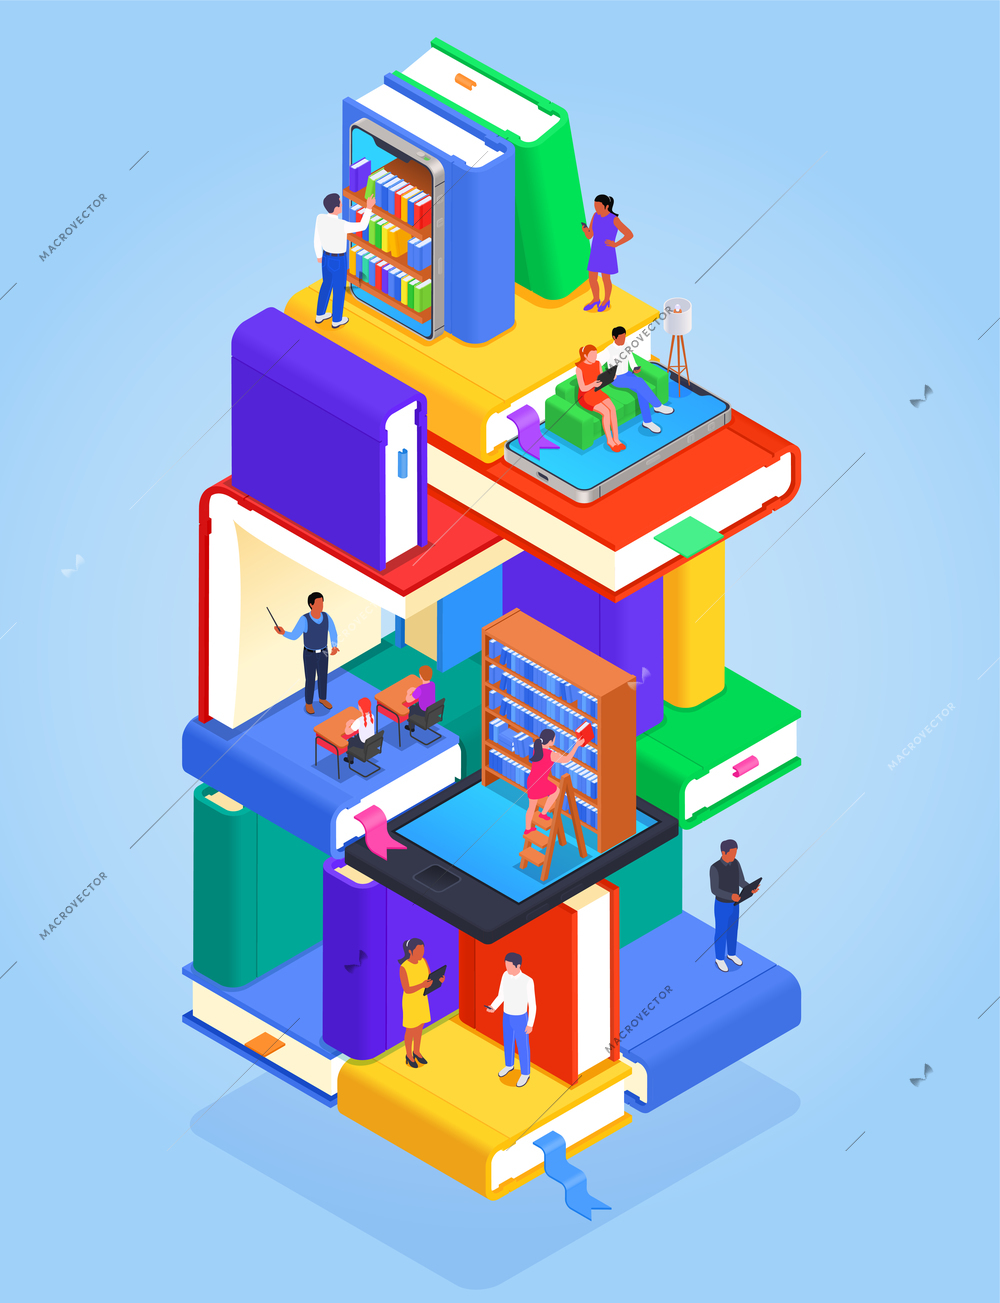 Digital online library isometric colored concept abstract multi story building with floors dedicated to various reading related matters vector illustration